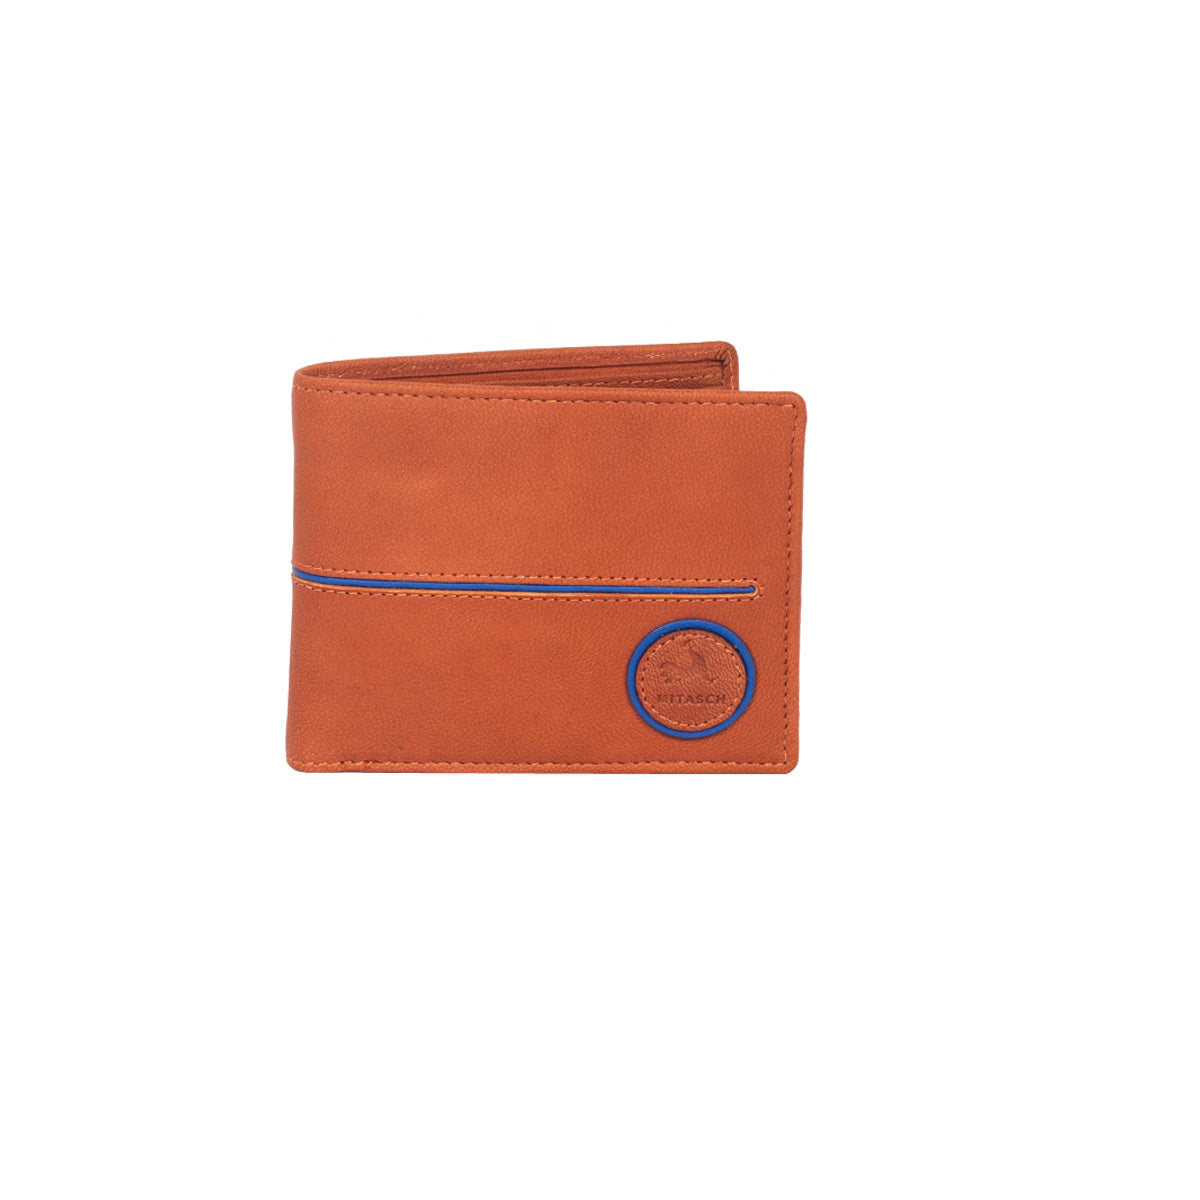 Hinged wallet Leonore 